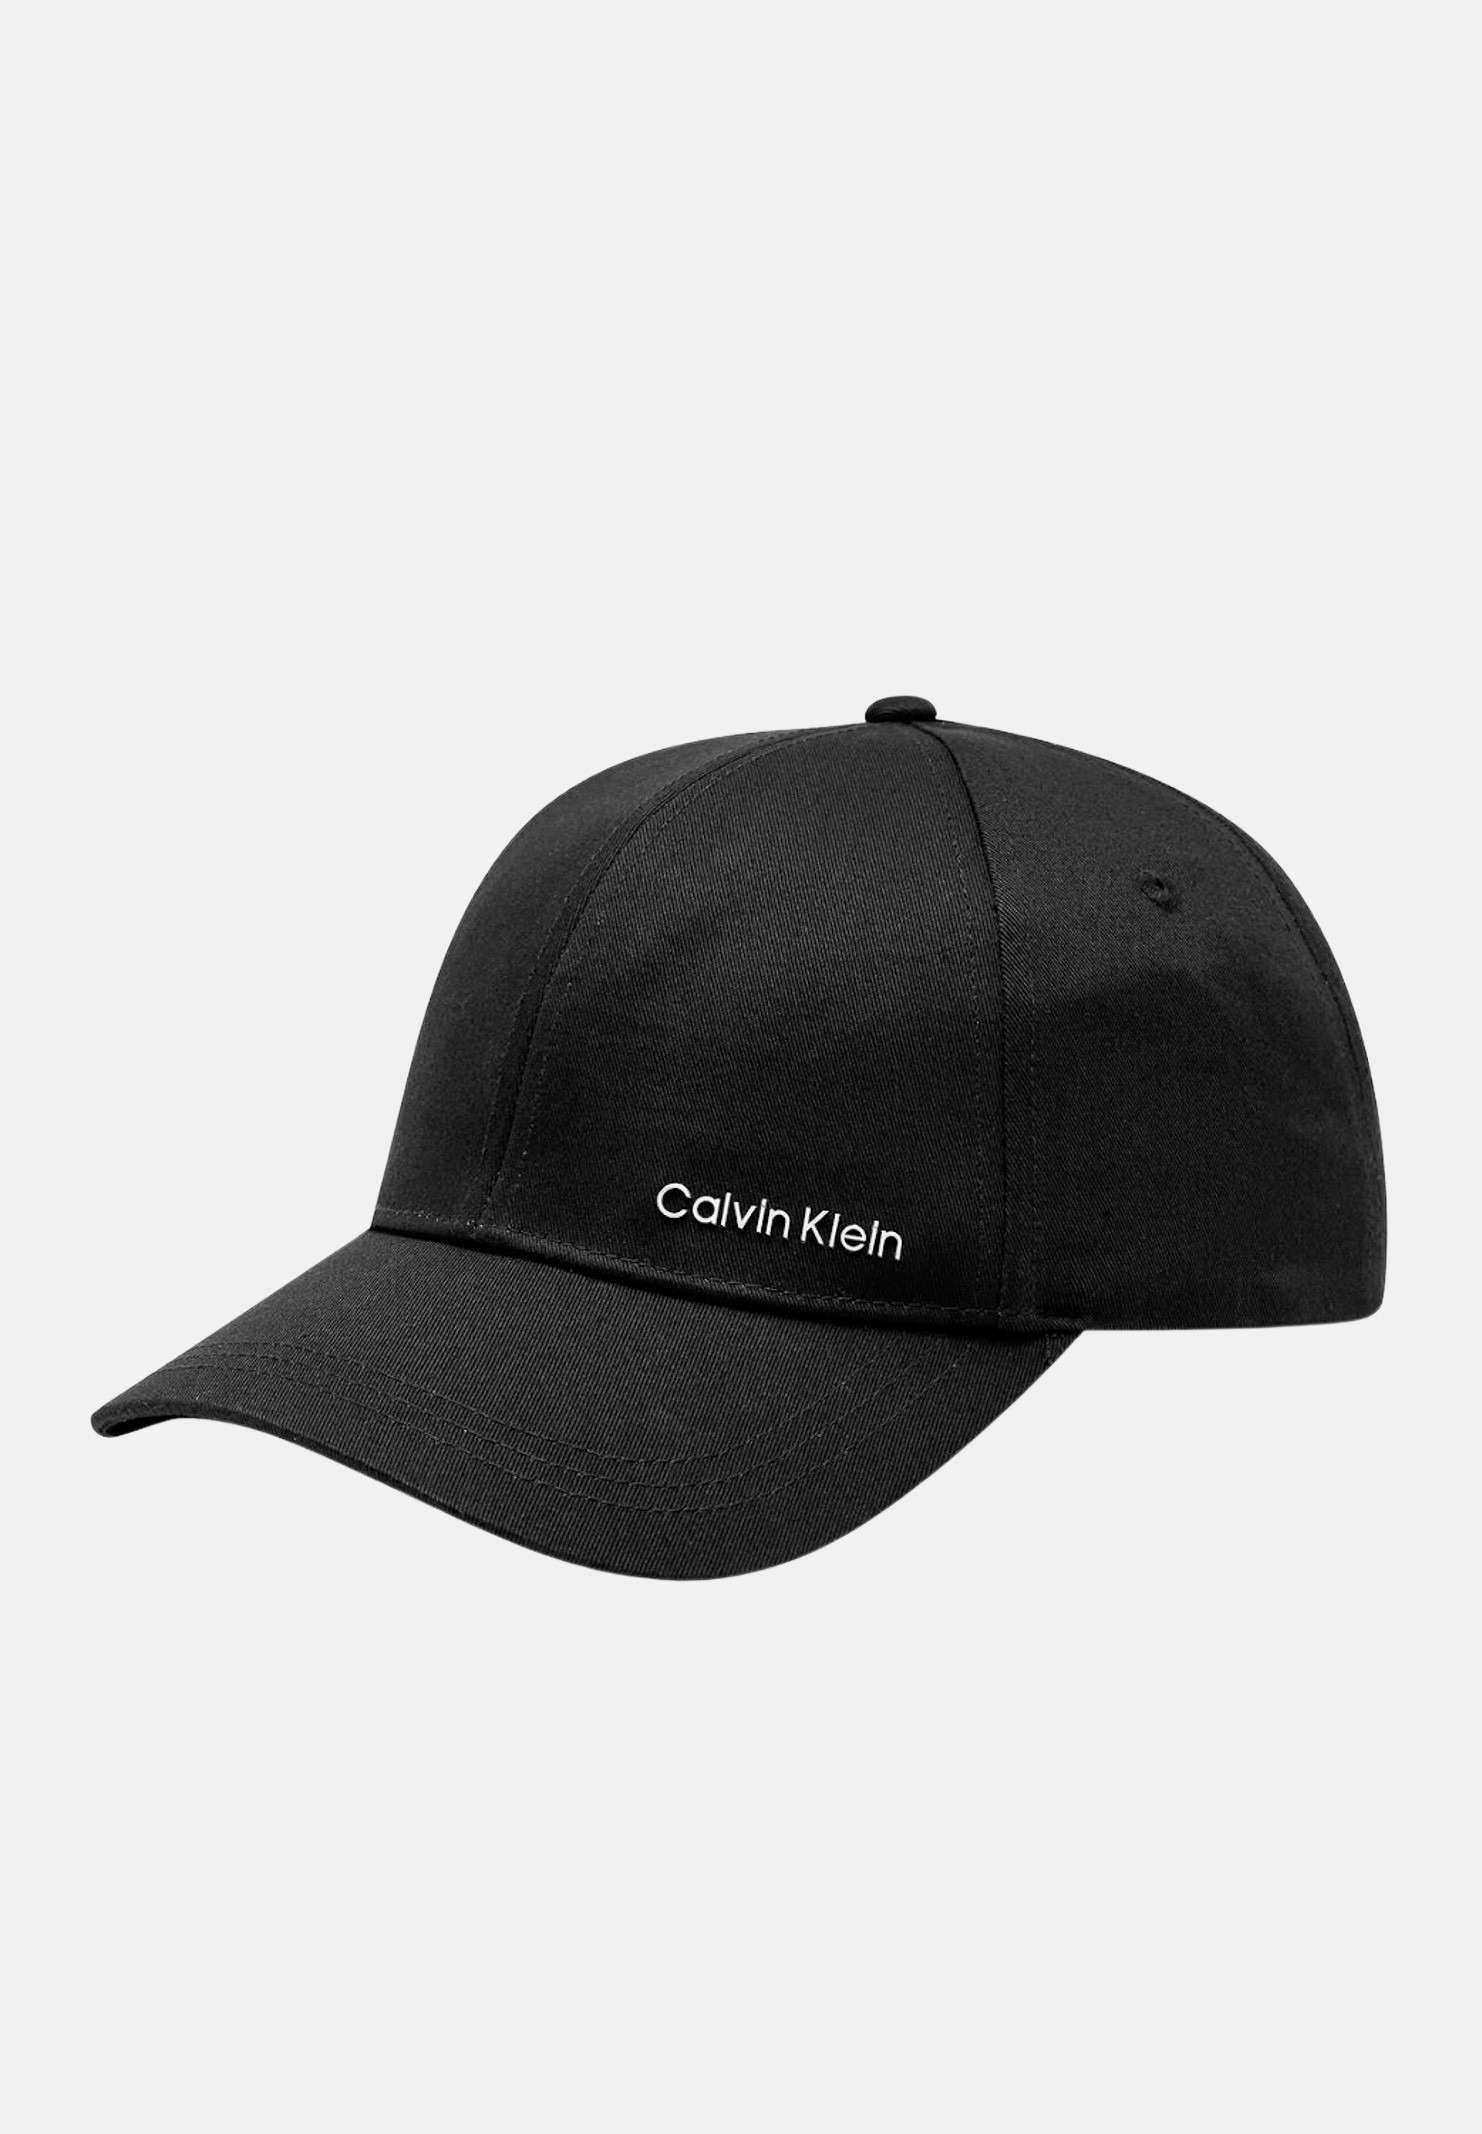 Black men's and women's cap with contrasting white logo - CALVIN